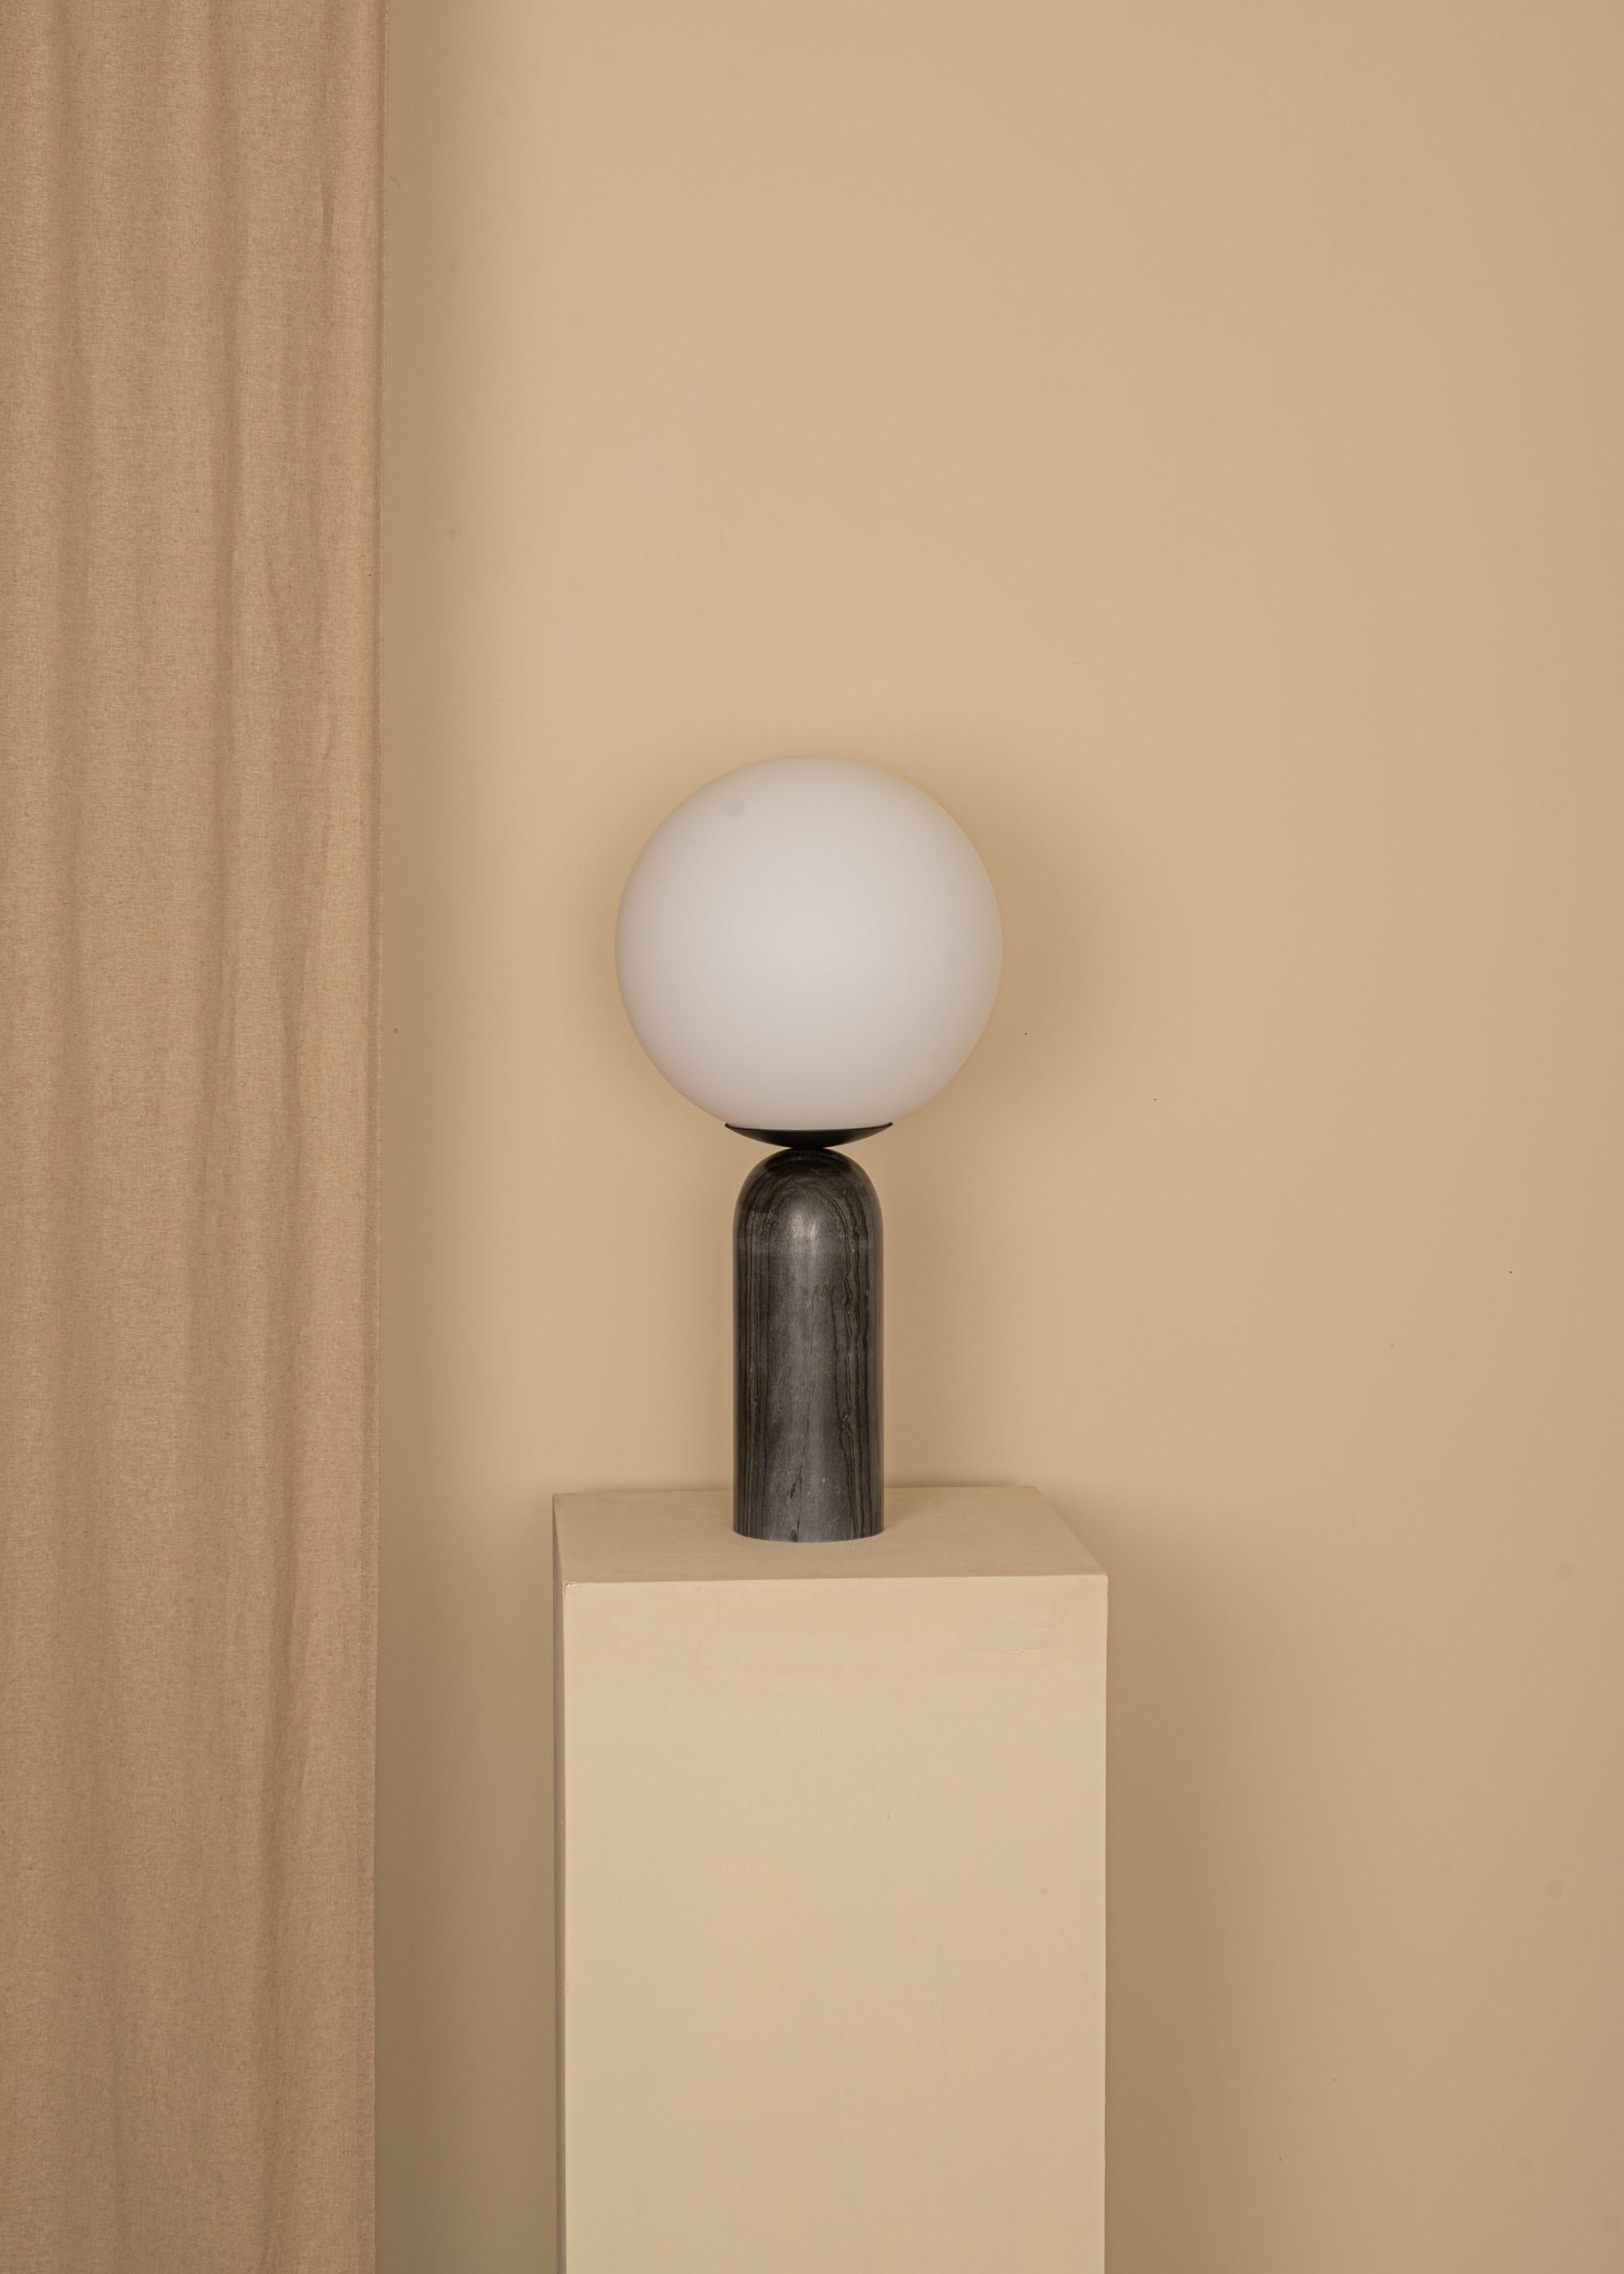 Black Marble and Steel Atlas Table Lamp by Simone & Marcel